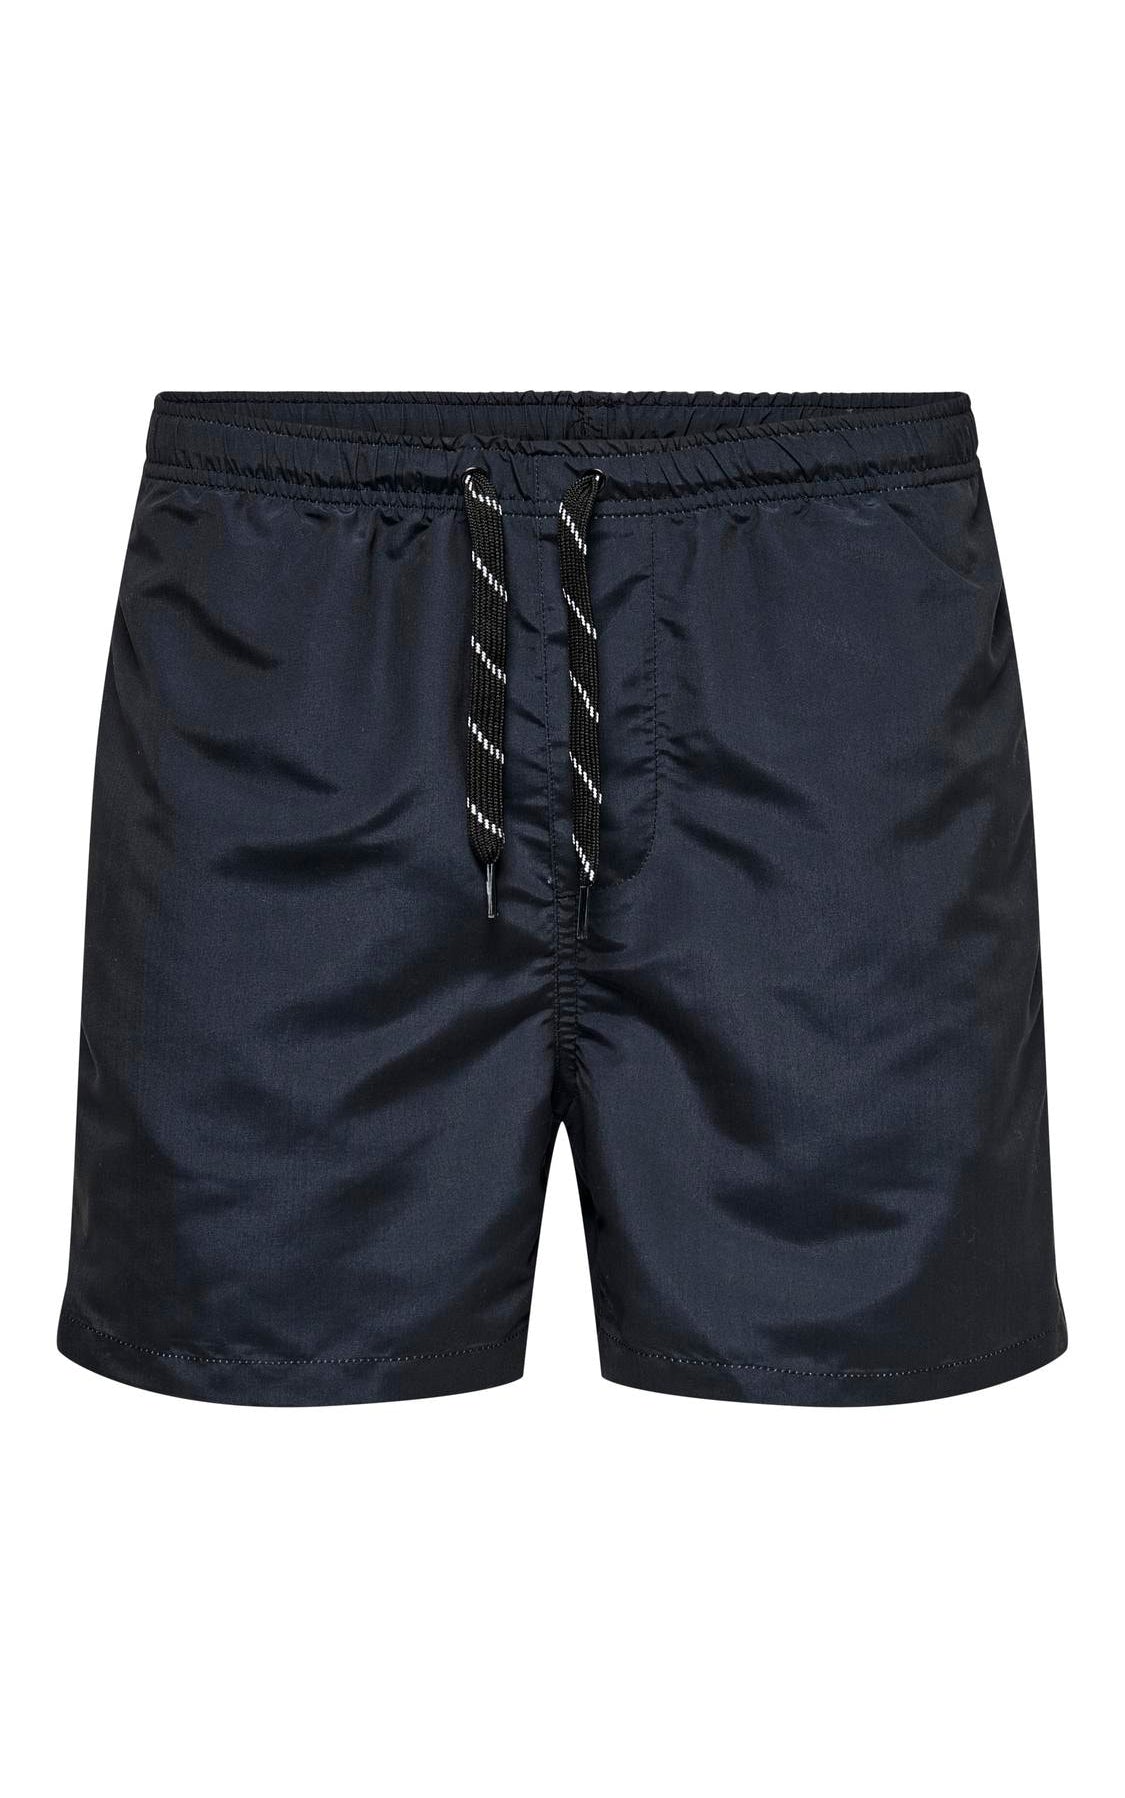 Ted Life Swim Shorts in Black